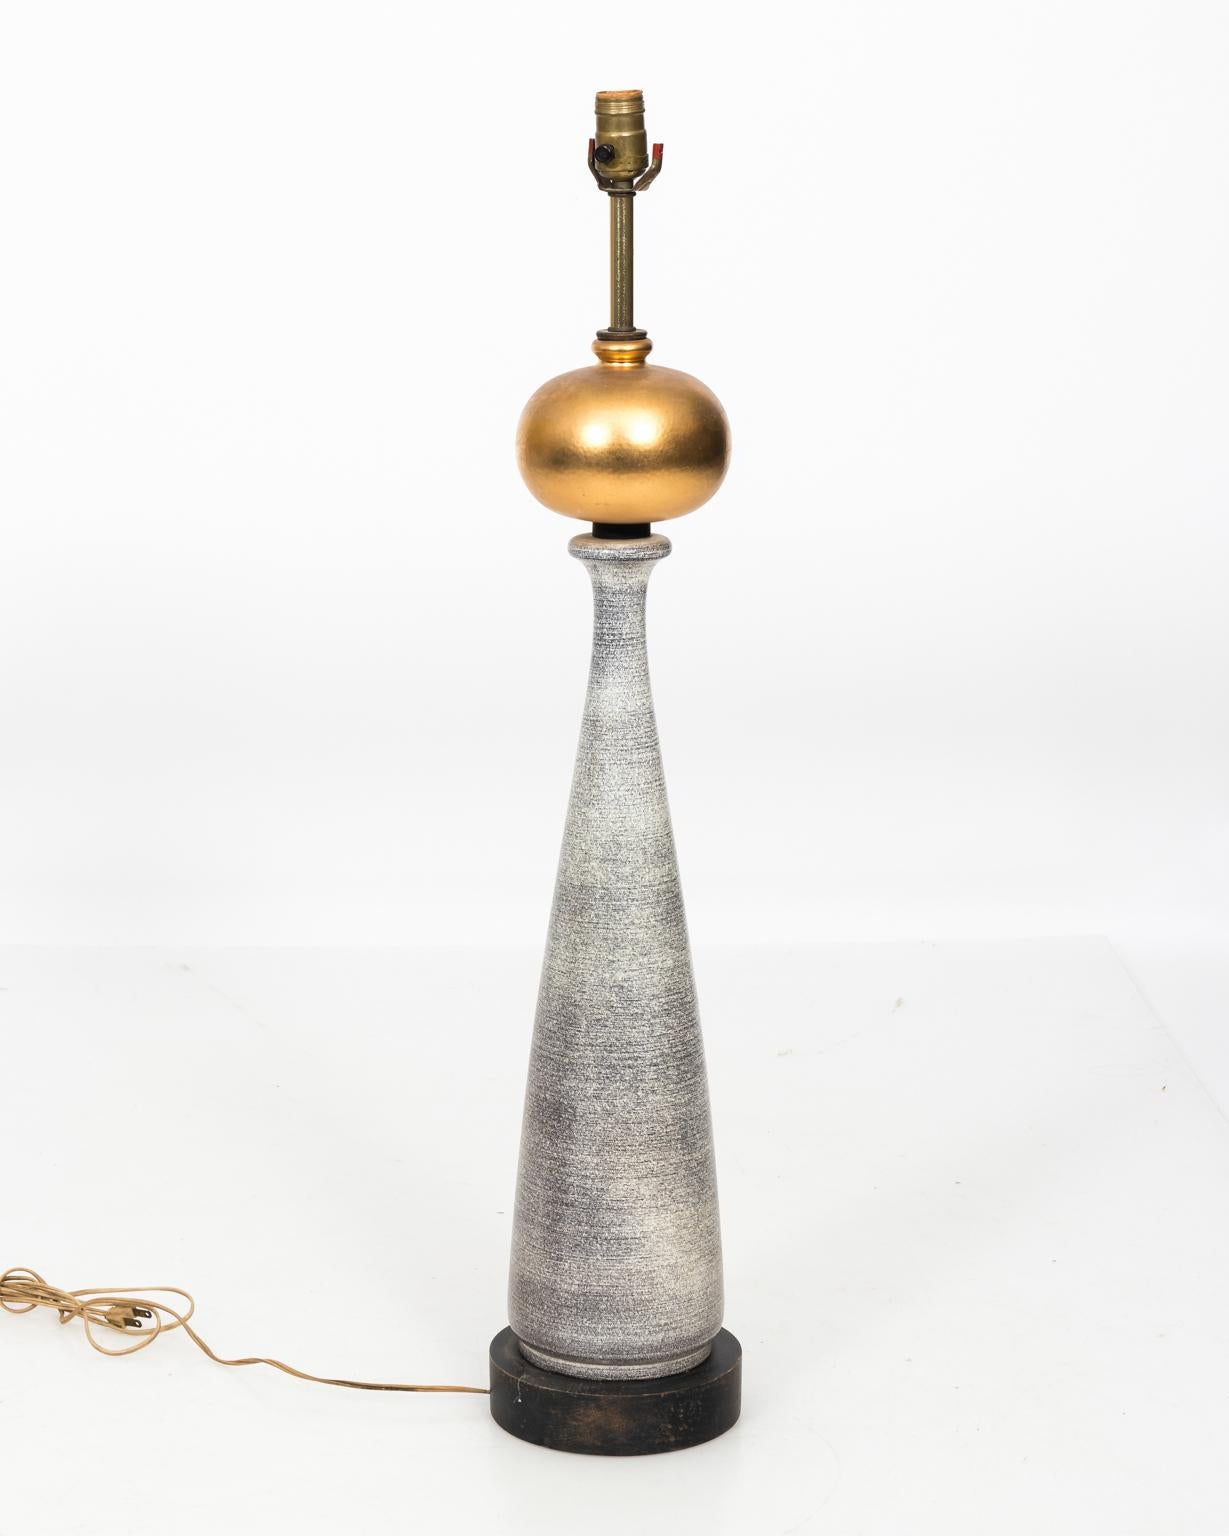 Modern style ceramic base lamp with gold globe on wood base, circa mid-20th century. This lamp also features a new black shade.